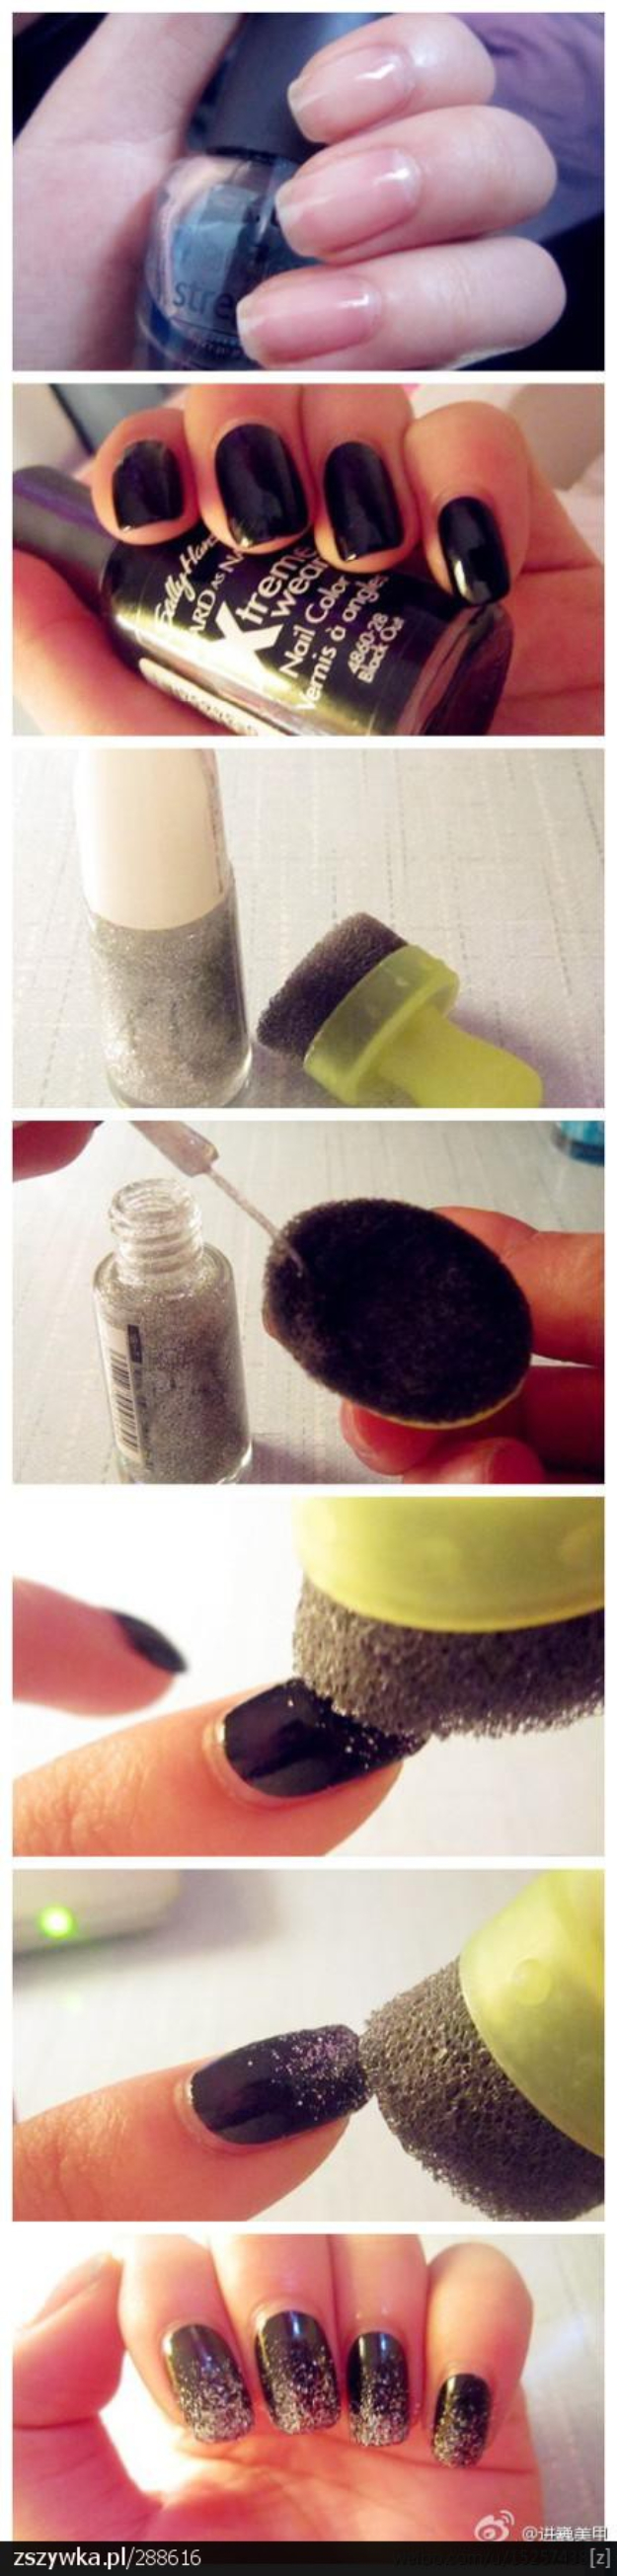 Cool Nail Art Ideas -Glitter Sponge Galaxy Manicure Nail Design Tutorial- Easy Nail Art Tutorials - Fun and Easy DIY Nail Designs - Step By Step Tutorials and Instructions for Manicures at Home 